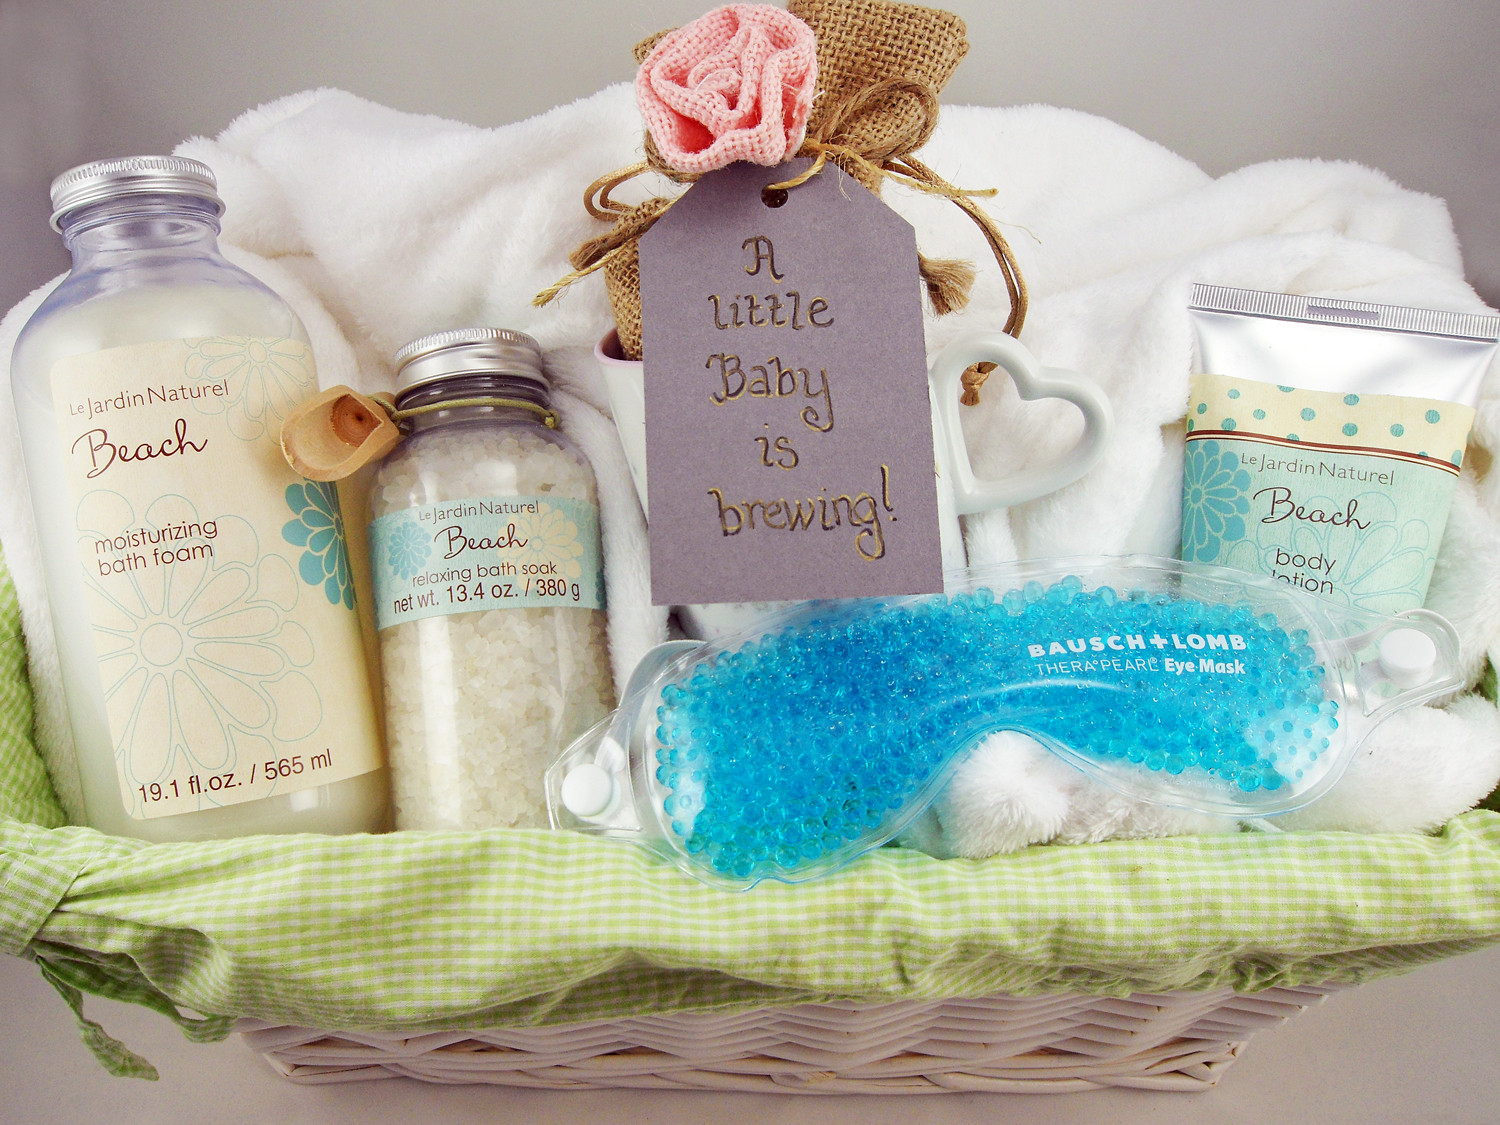 Unique New Baby Gifts
 Expecting Couples Love These Unique Personalized Baby Gifts